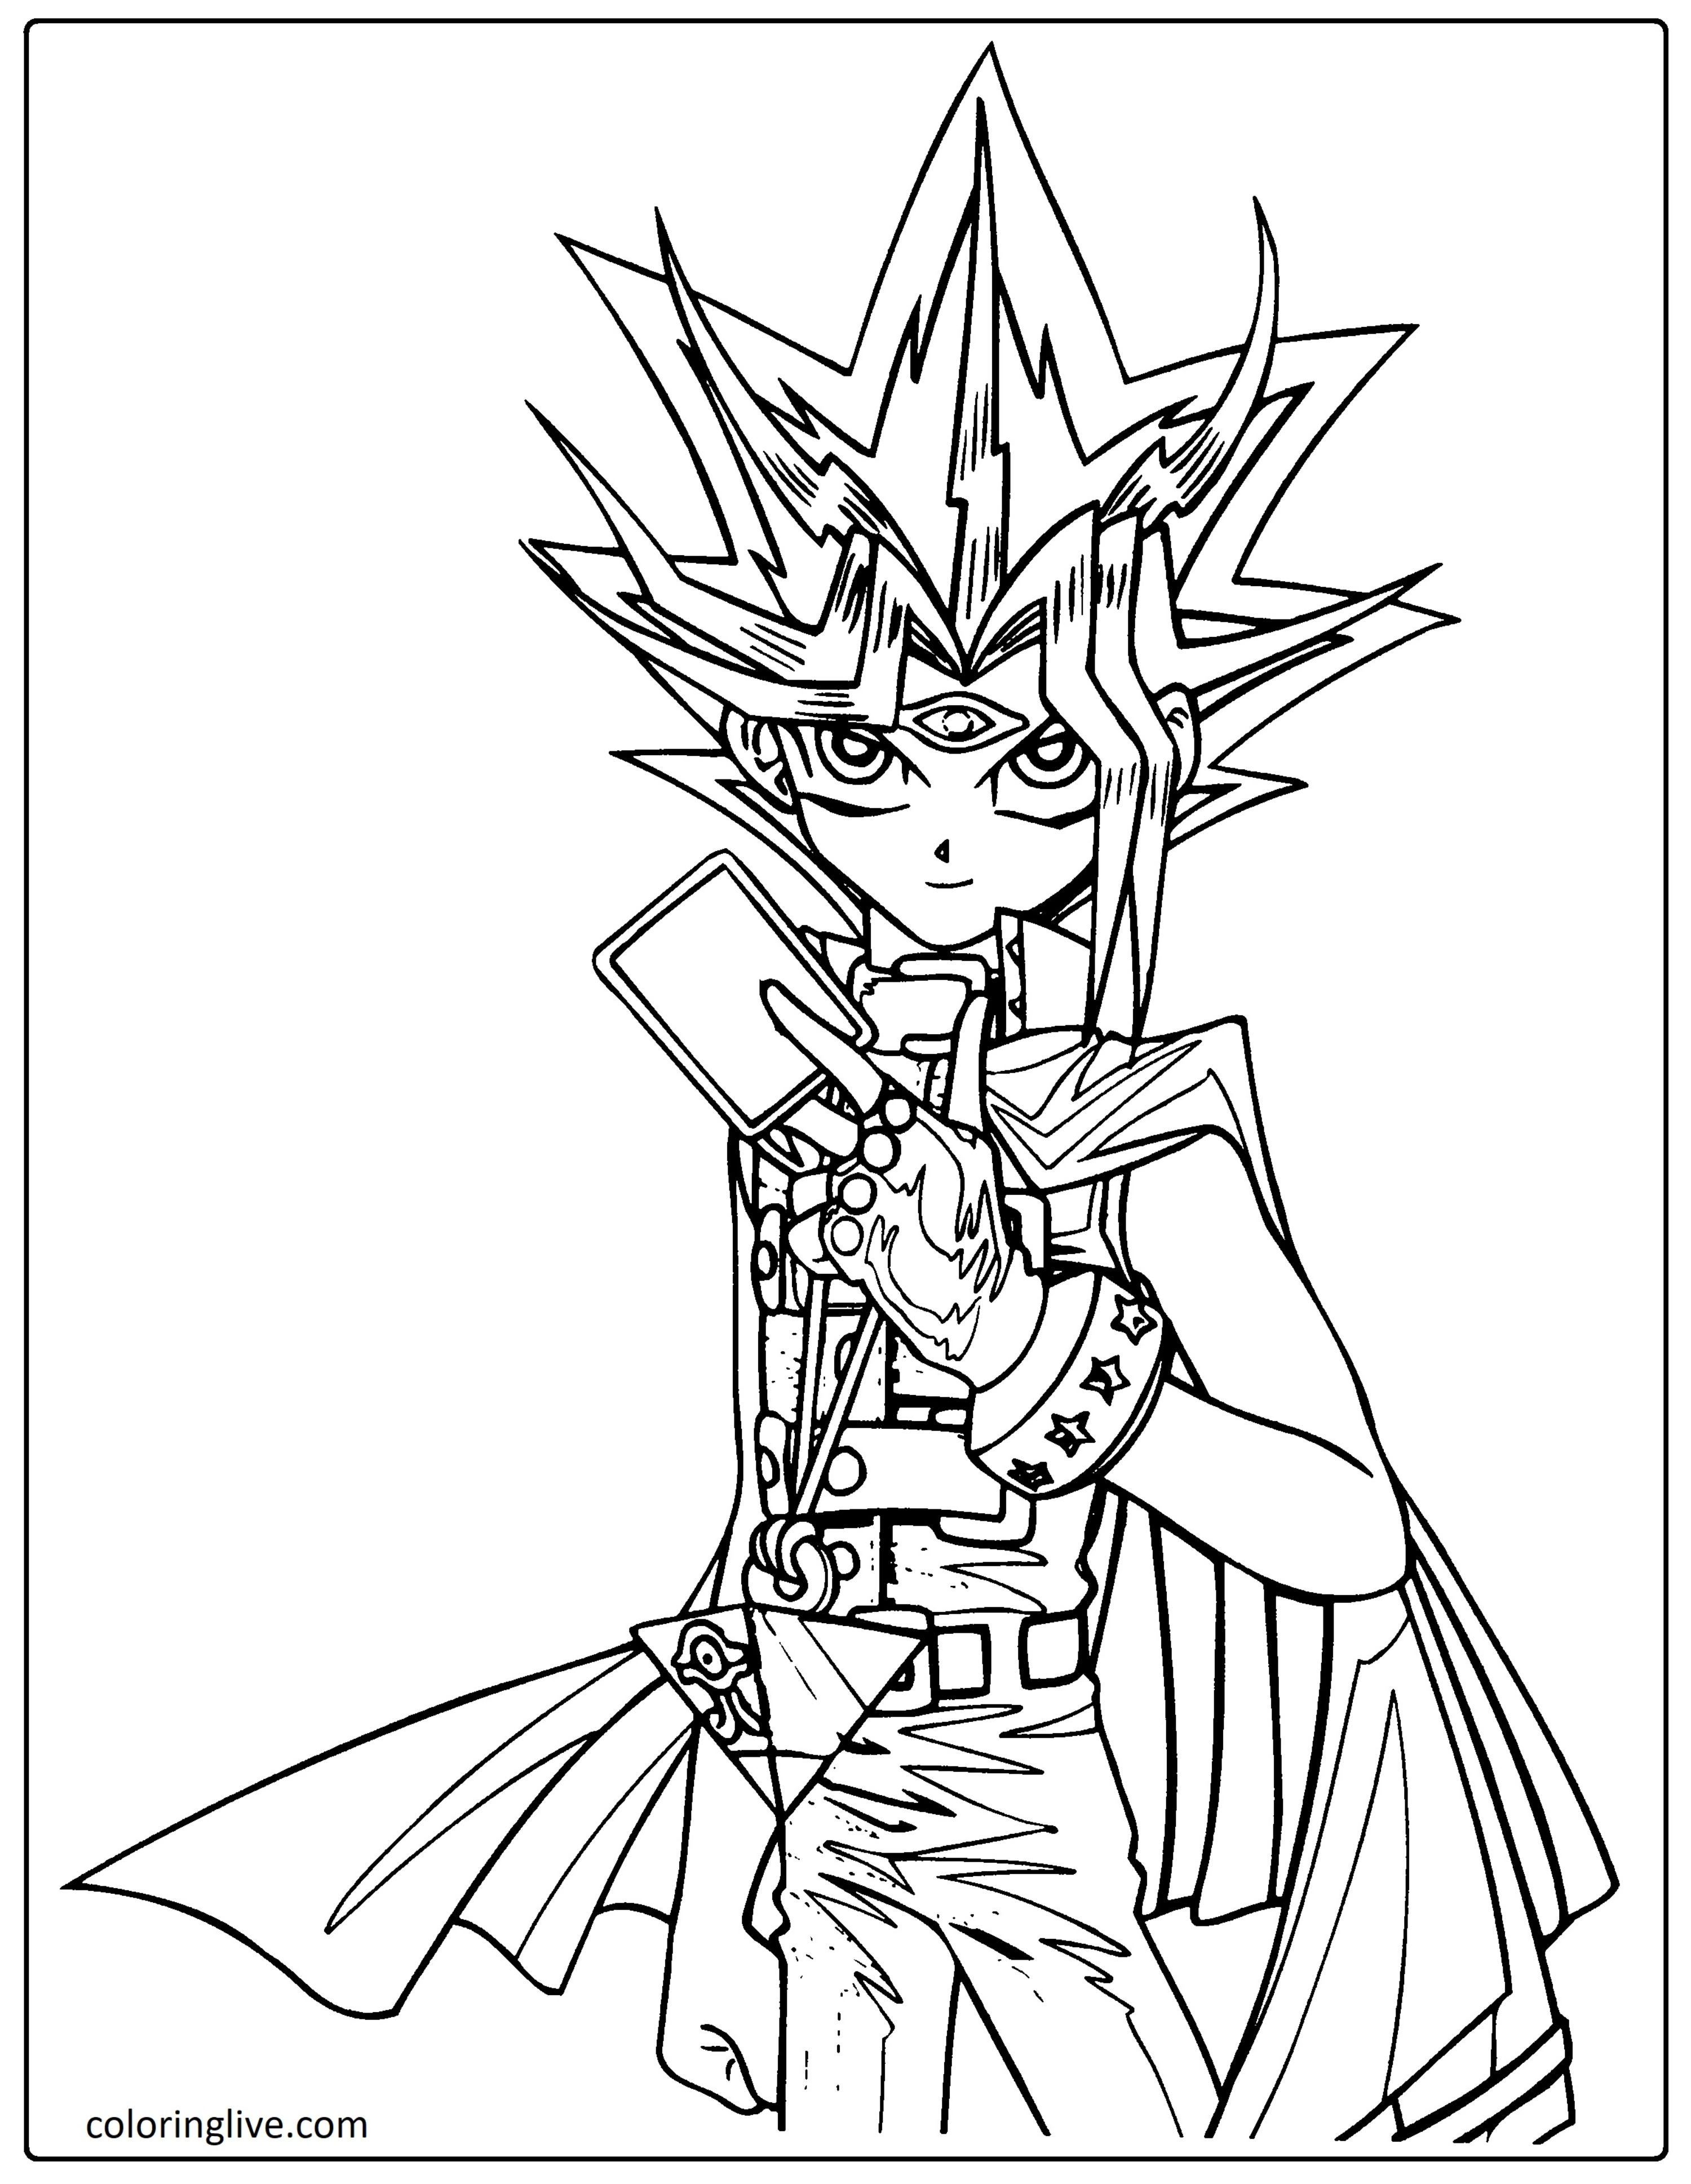 YuGiOH Outline Coloring Page (Yu Gi Oh) #998 | coloringlive.com